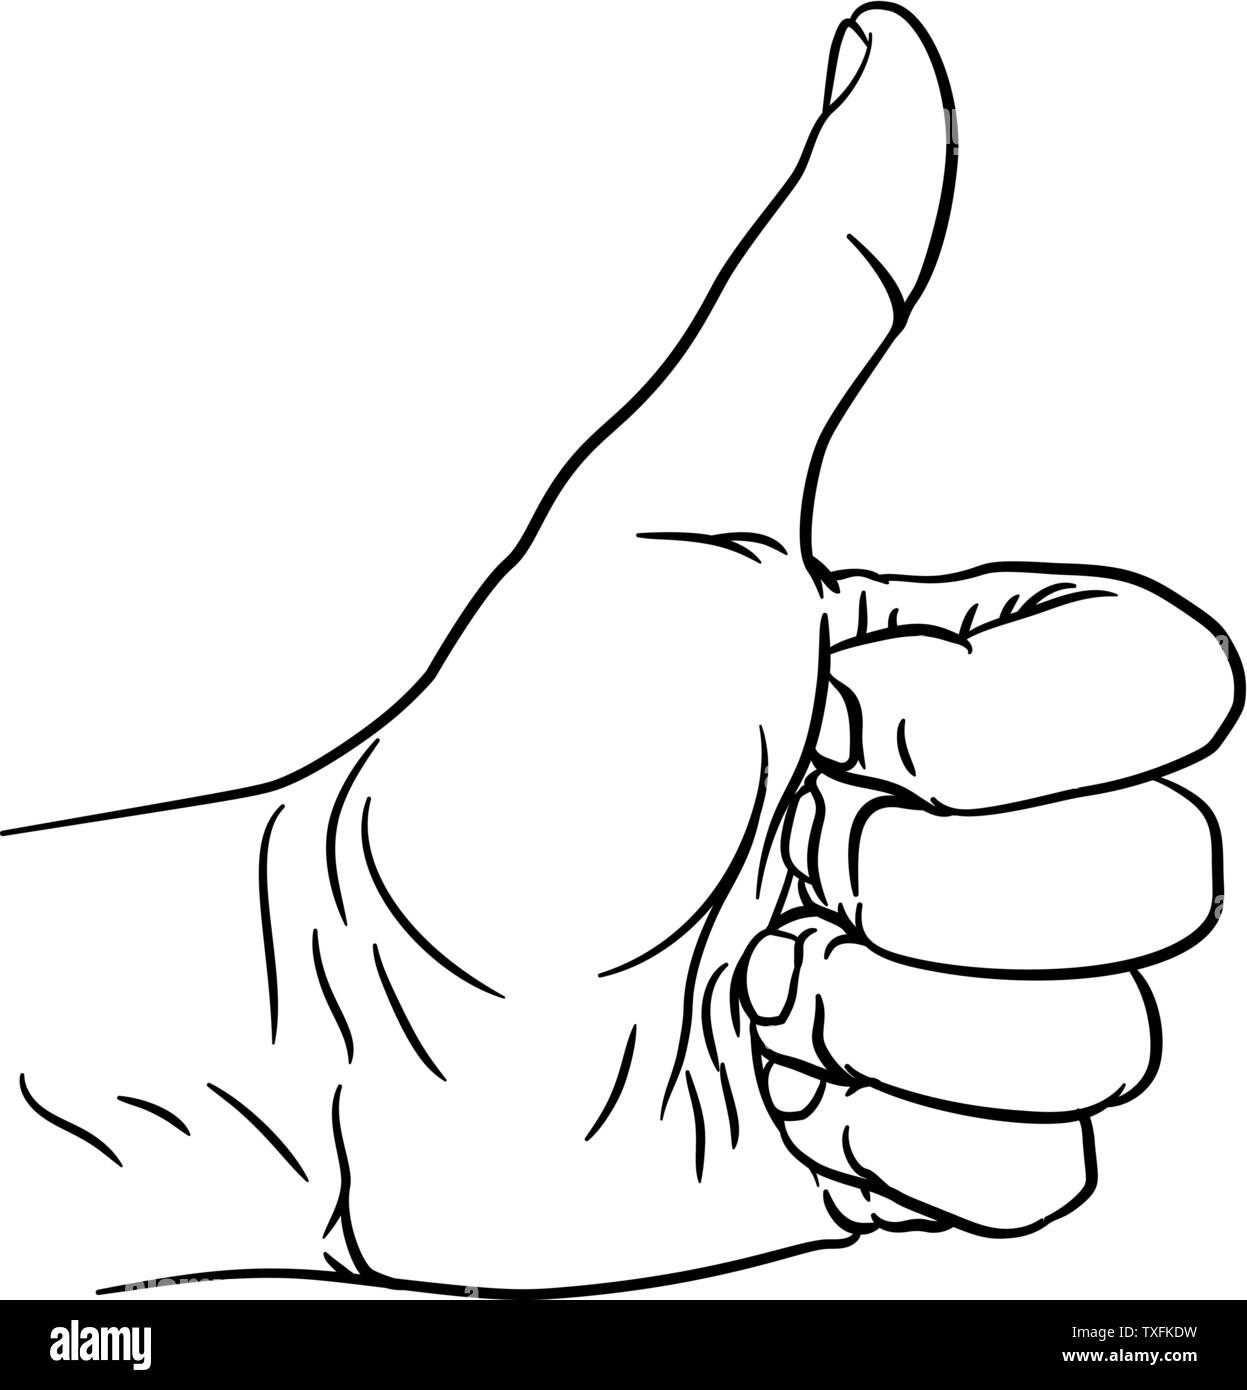 foreshadowed thumbs up drawing of hands